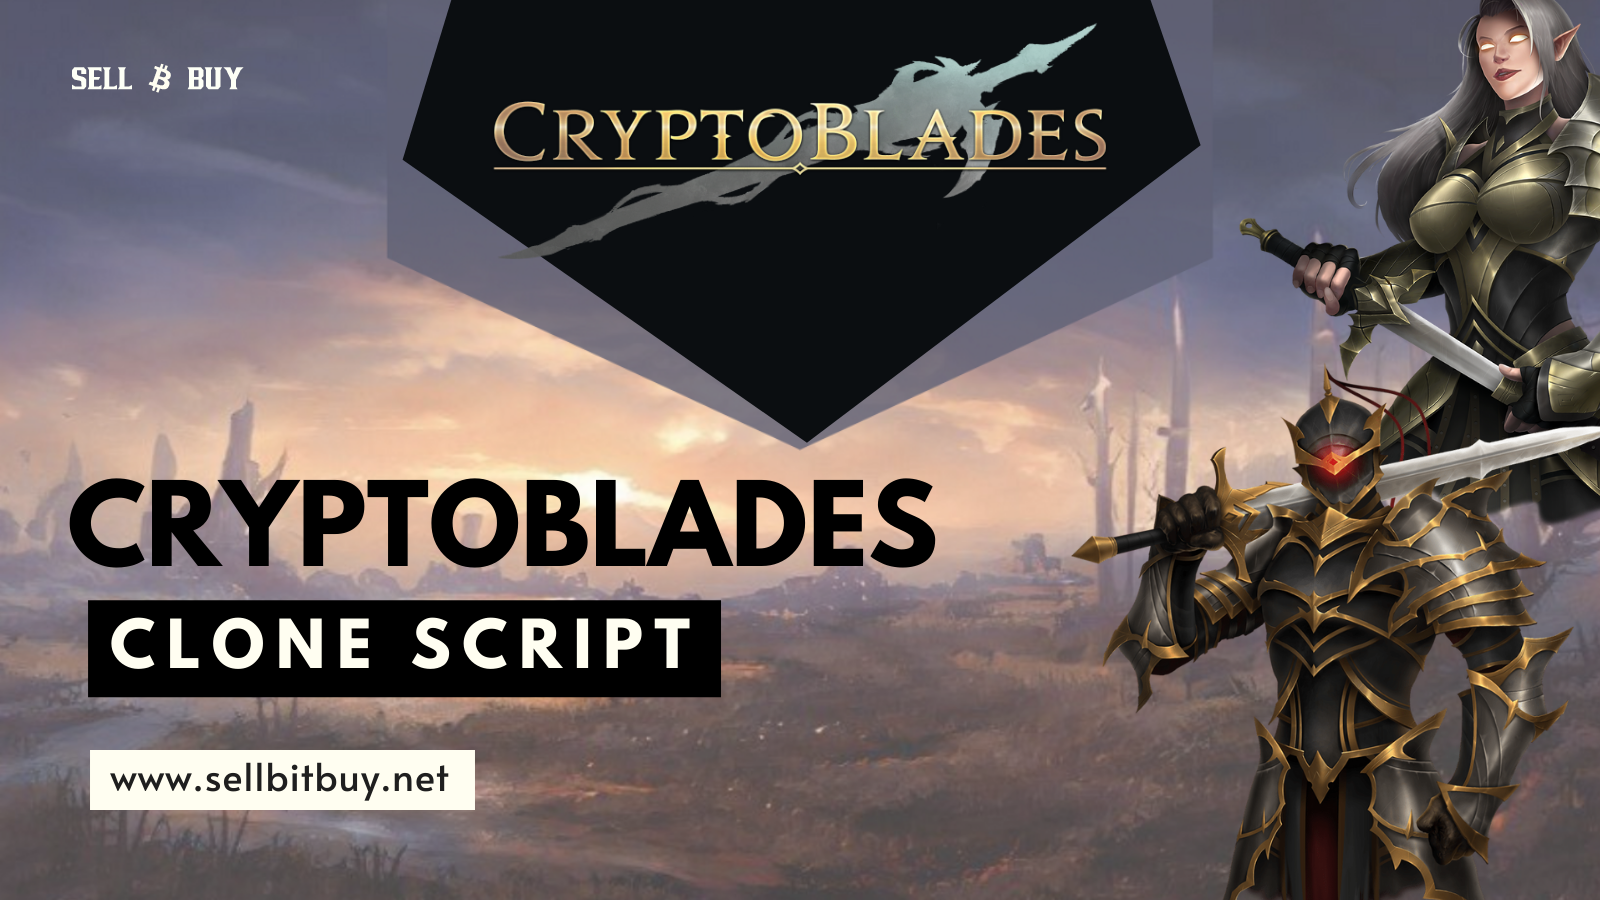 CryptoBlades Clone Script - To Create NFT Role-Playing Gaming Marketplace Like CryptoBlades On BSC